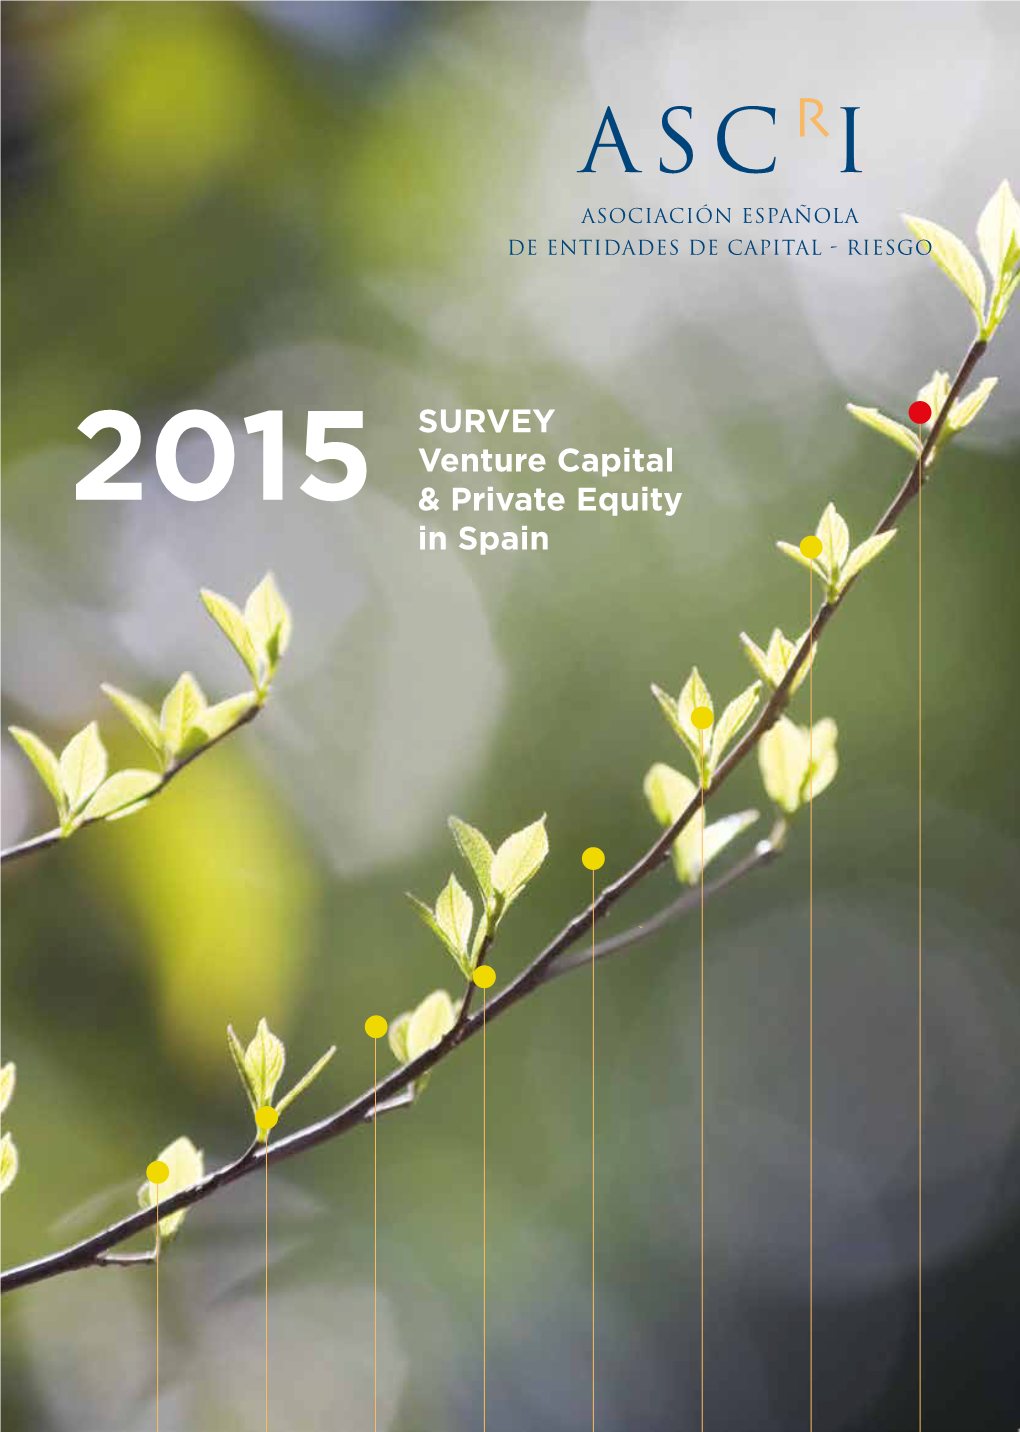 2015 SURVEY Venture Capital & Private Equity in Spain